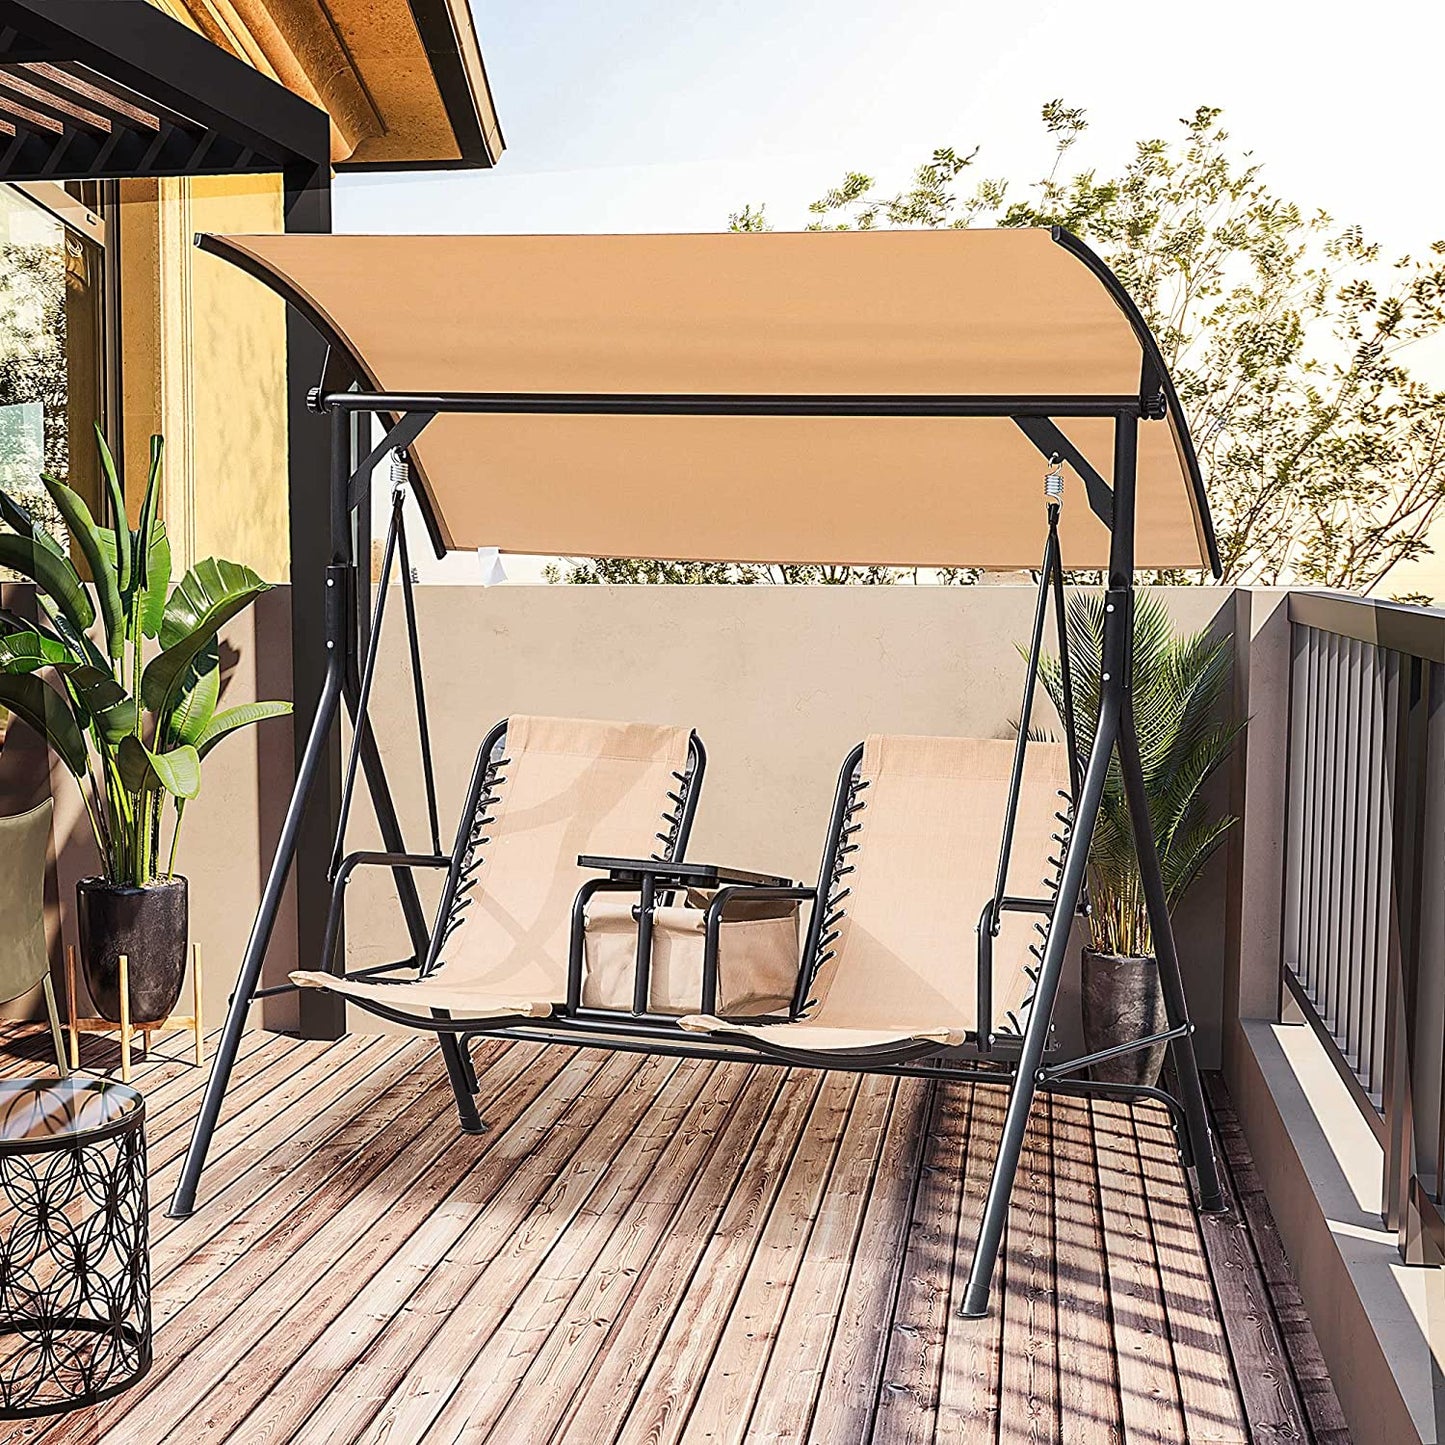 Outsunny 2-Seat Swing Chair Steel Frame Adjustable Canopy Sling Seats w/Middle Table